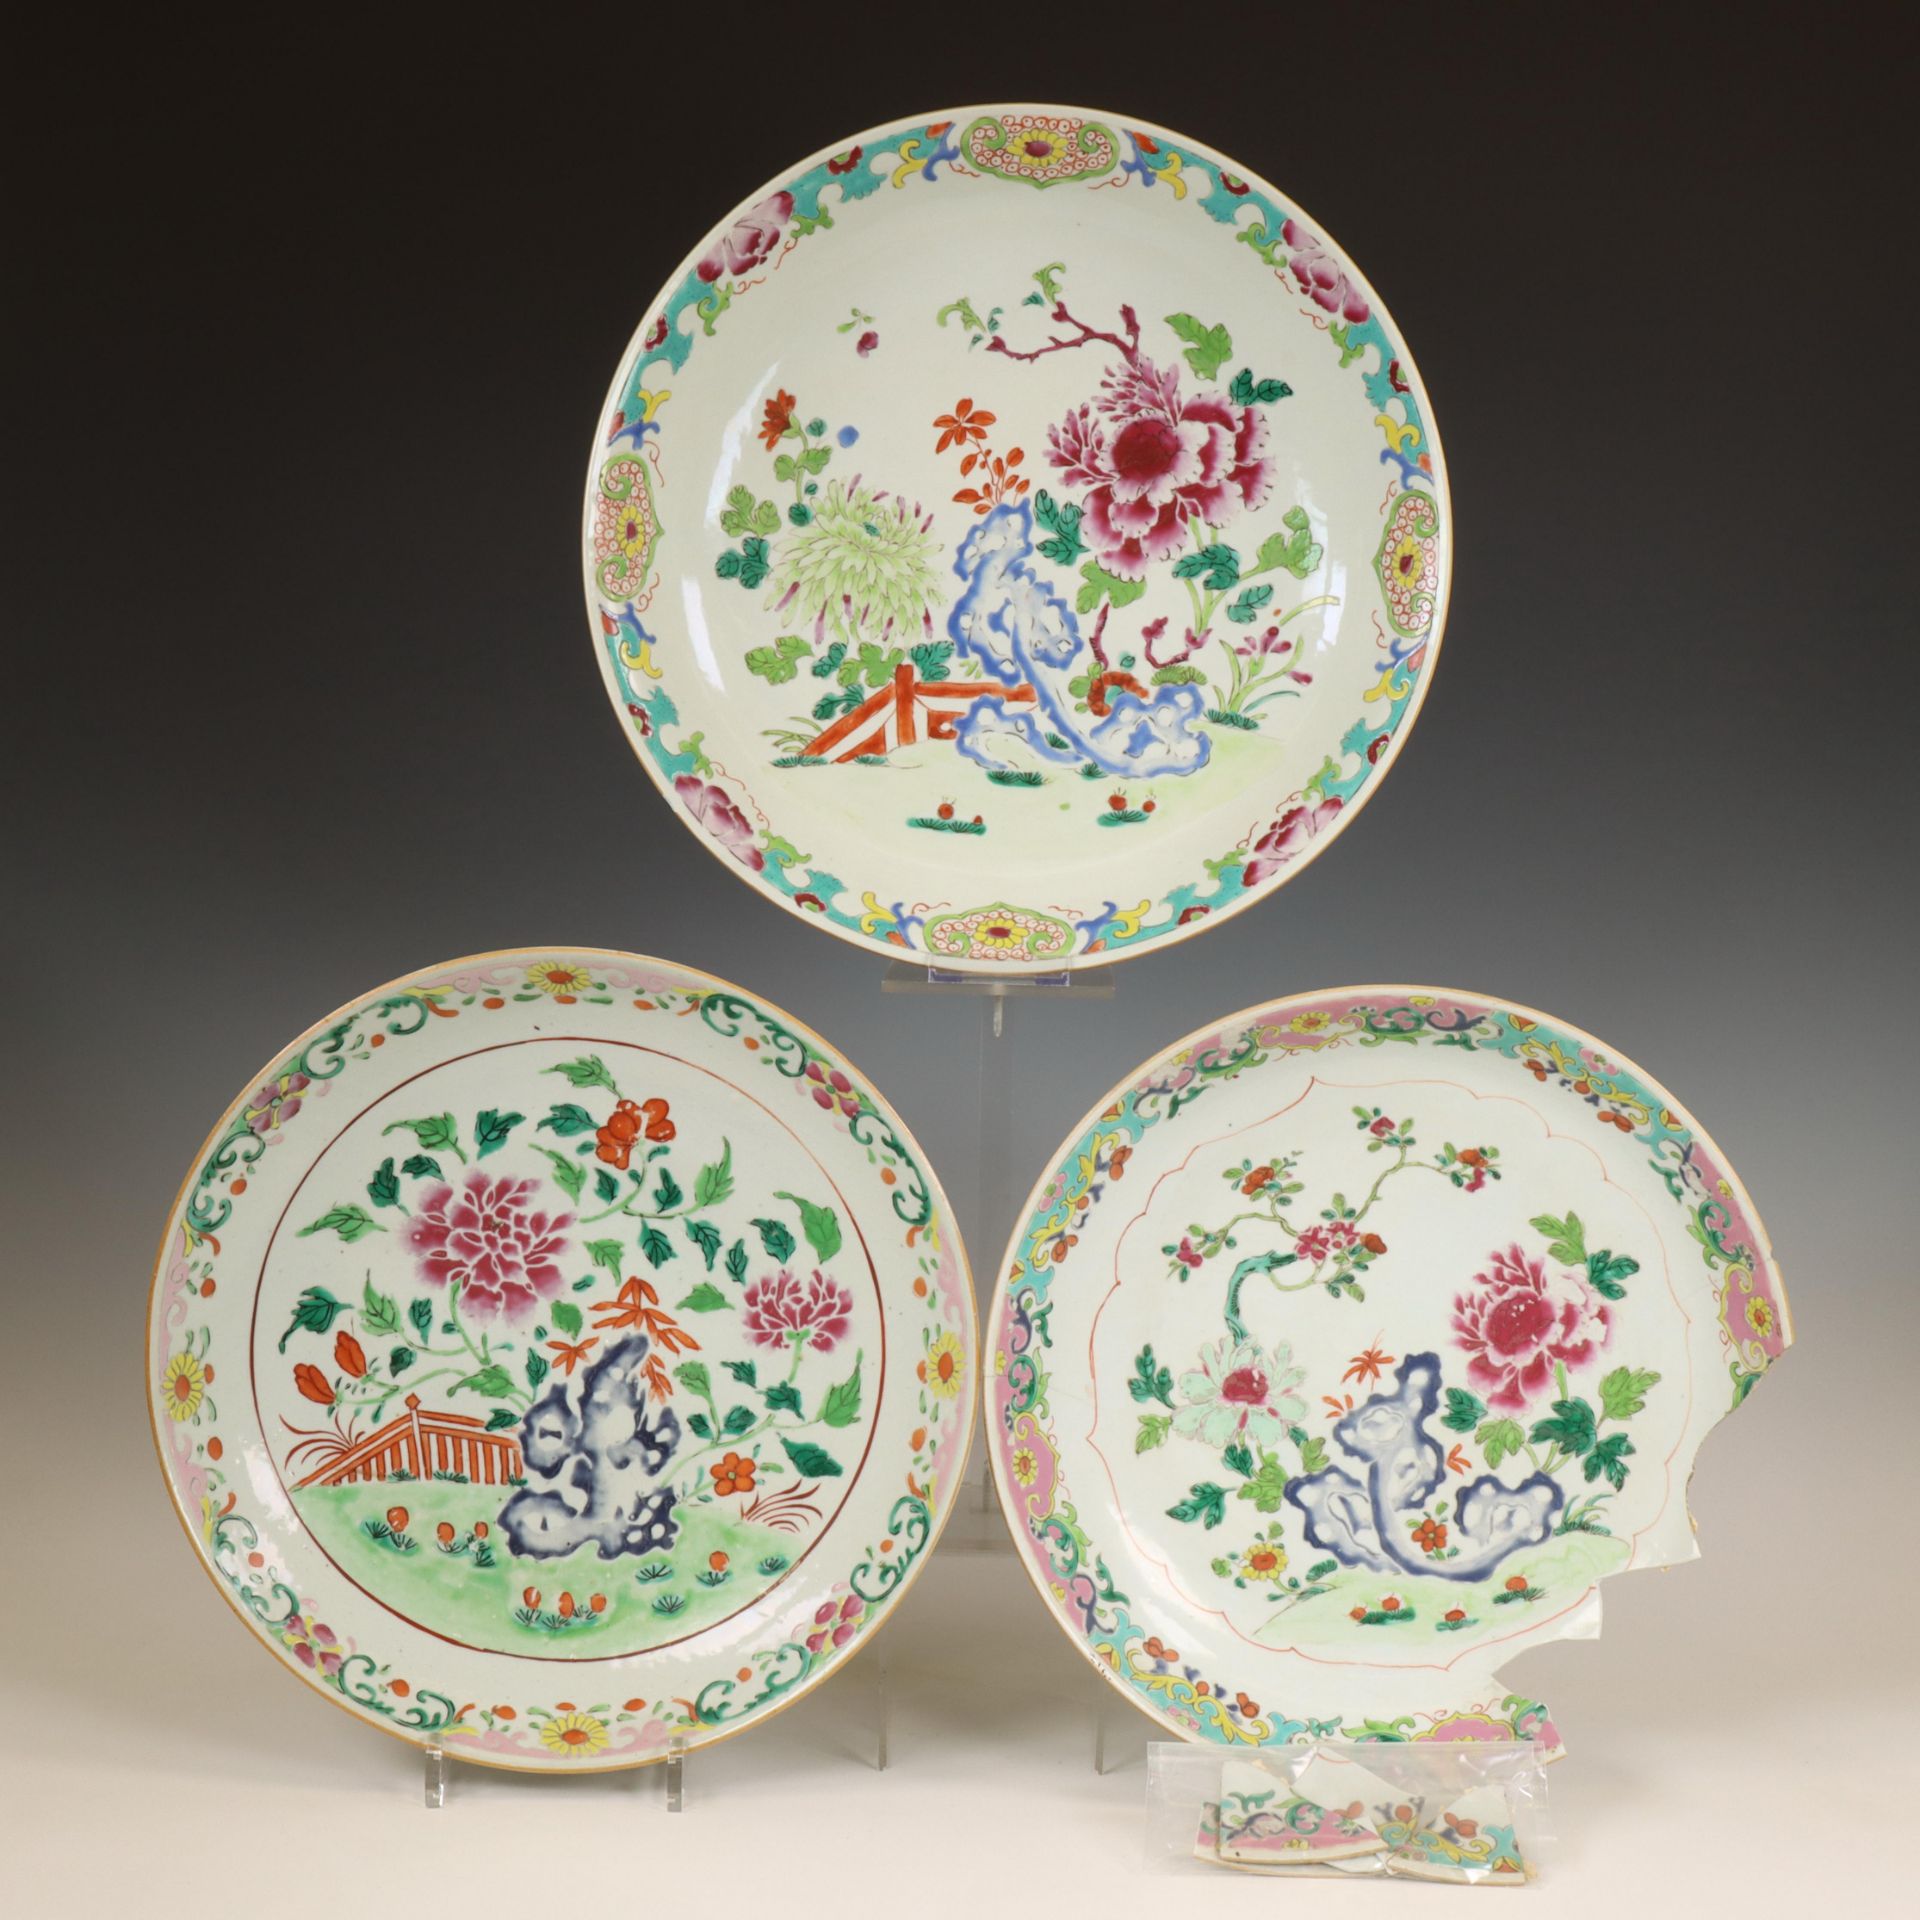 China, three famille rose porcelain dishes, Qianlong period (1736-1795),